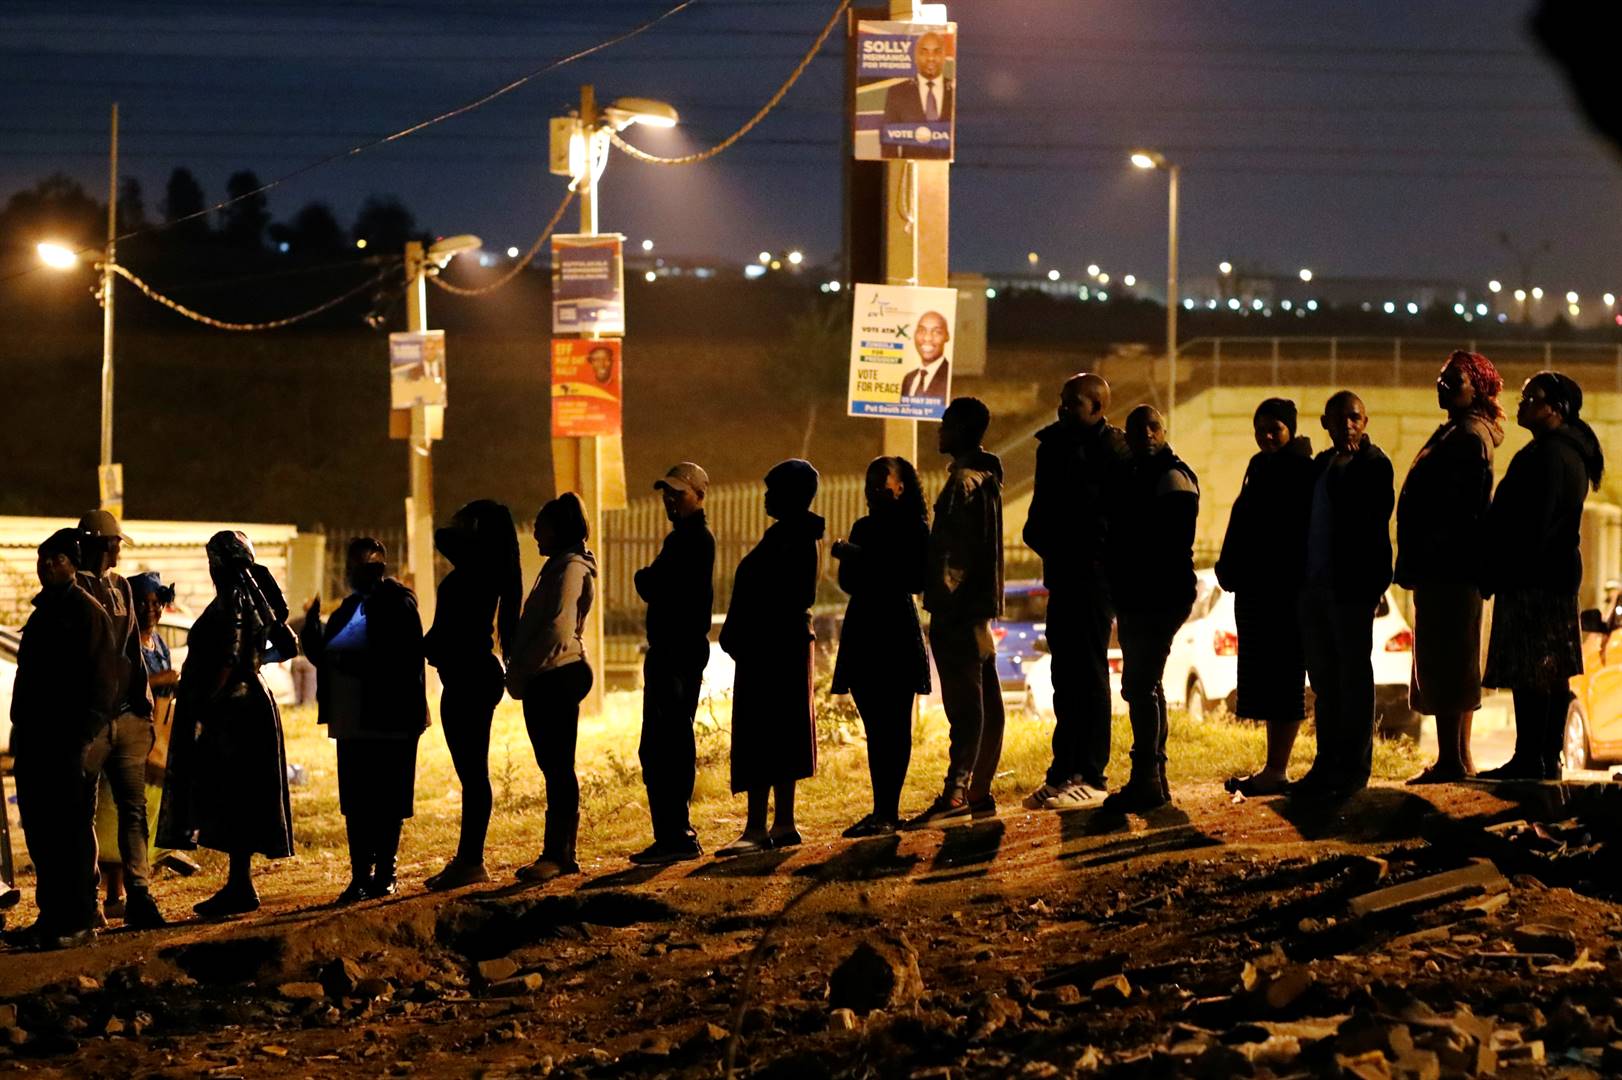 Voters queue to cast their ballots as night falls outside a polling station in Alexandra township in Johannesburg on Wednesday (May 8 2019). Picture: Mike Hutchings/Reuters